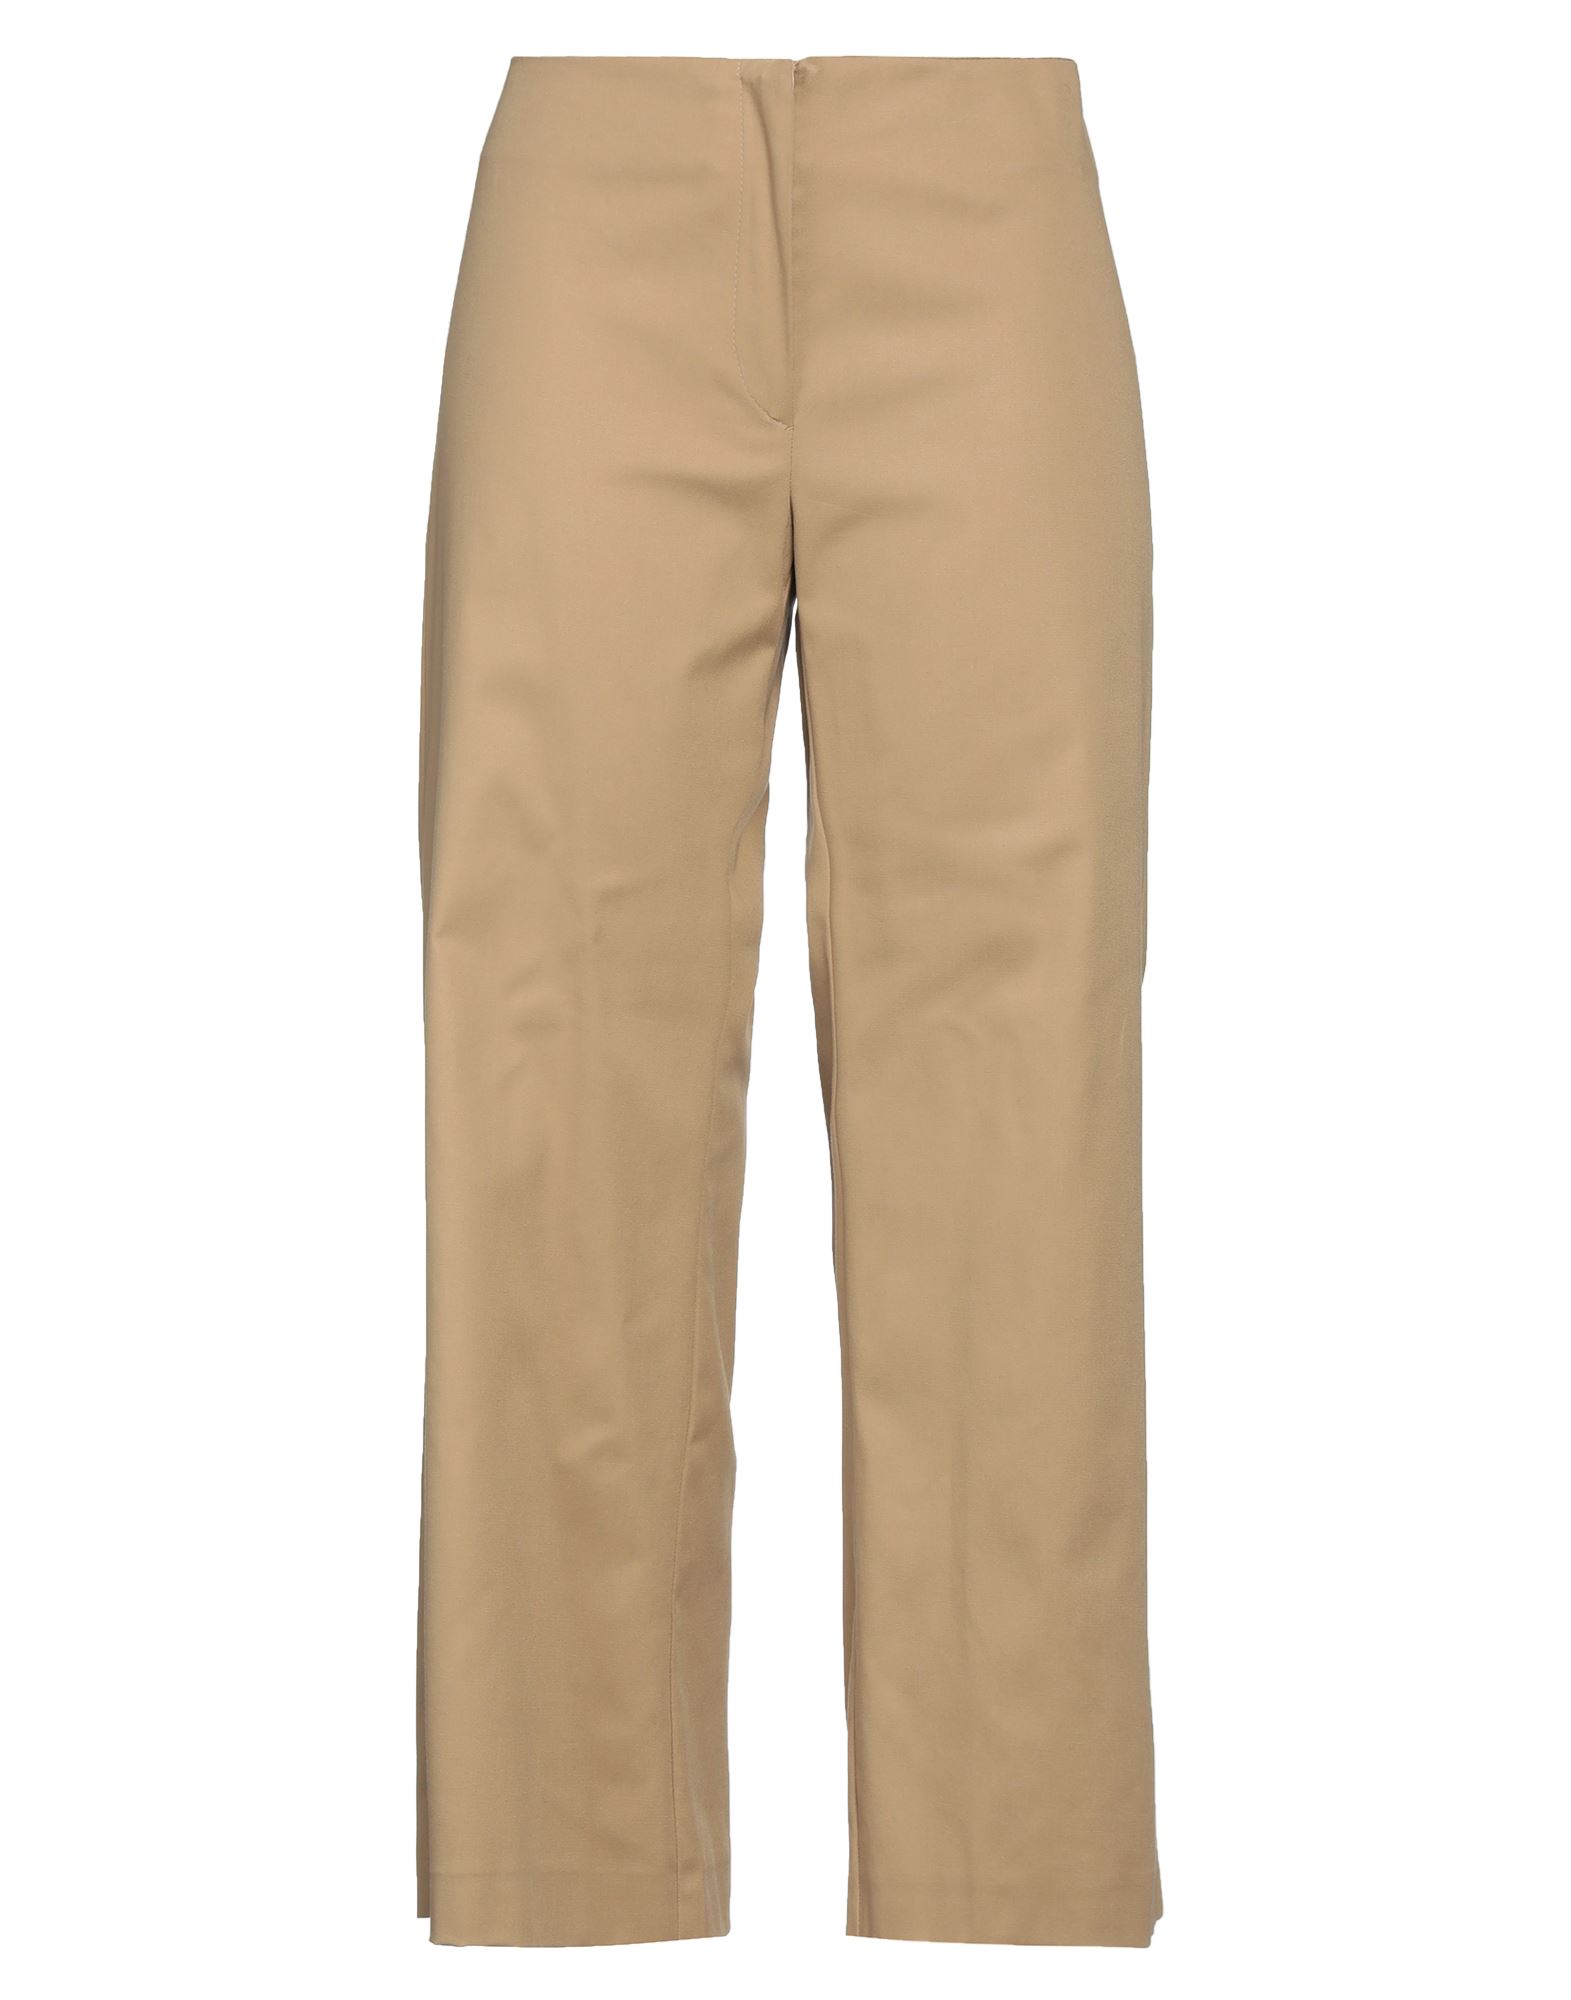 Millenovecentosettantotto Pants In Camel